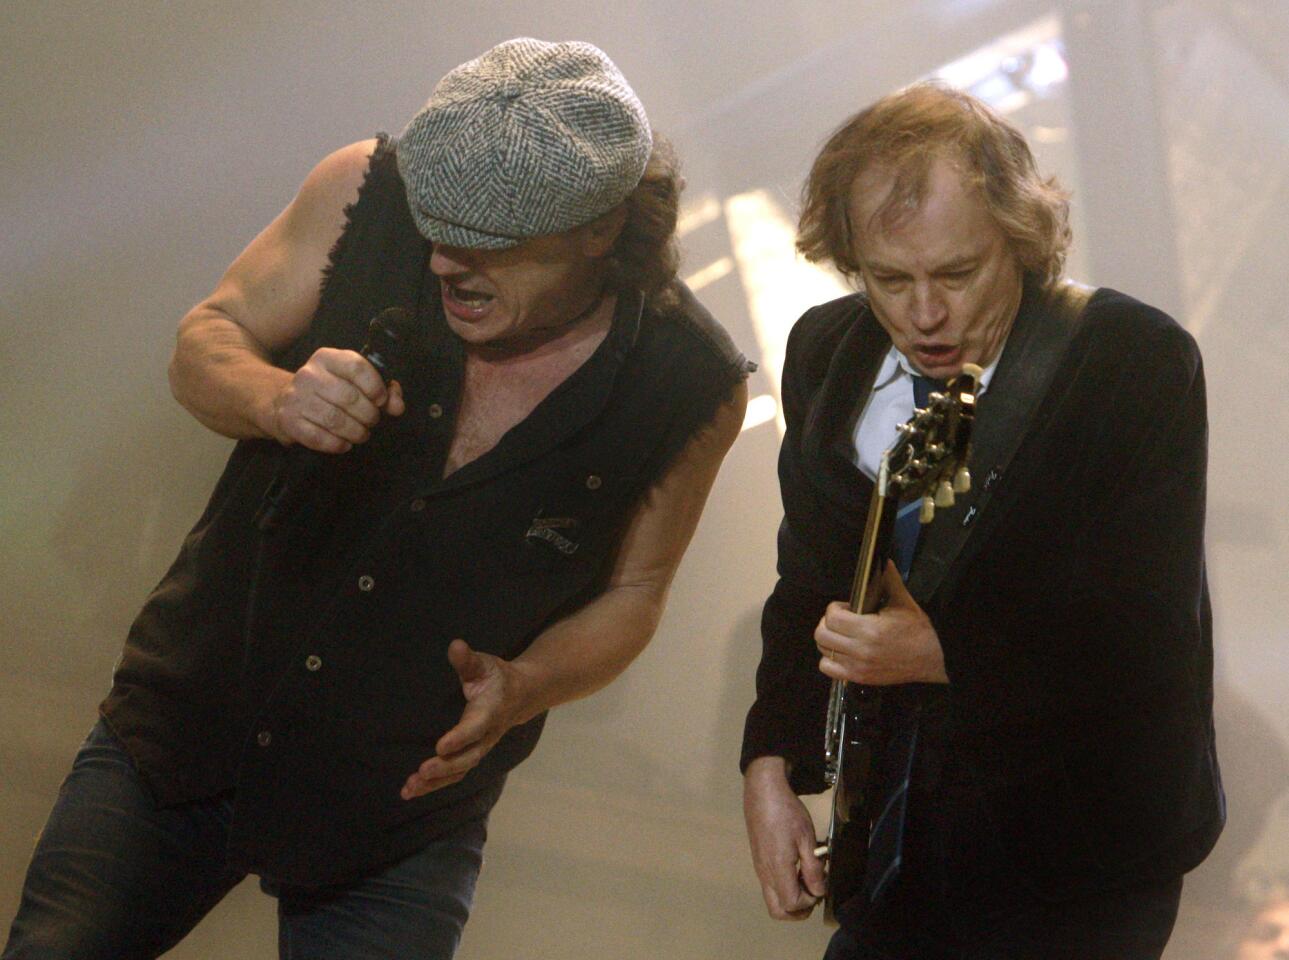 Brian Johnson, left, and Angus Young of AC/DC will perform at the Grammys.